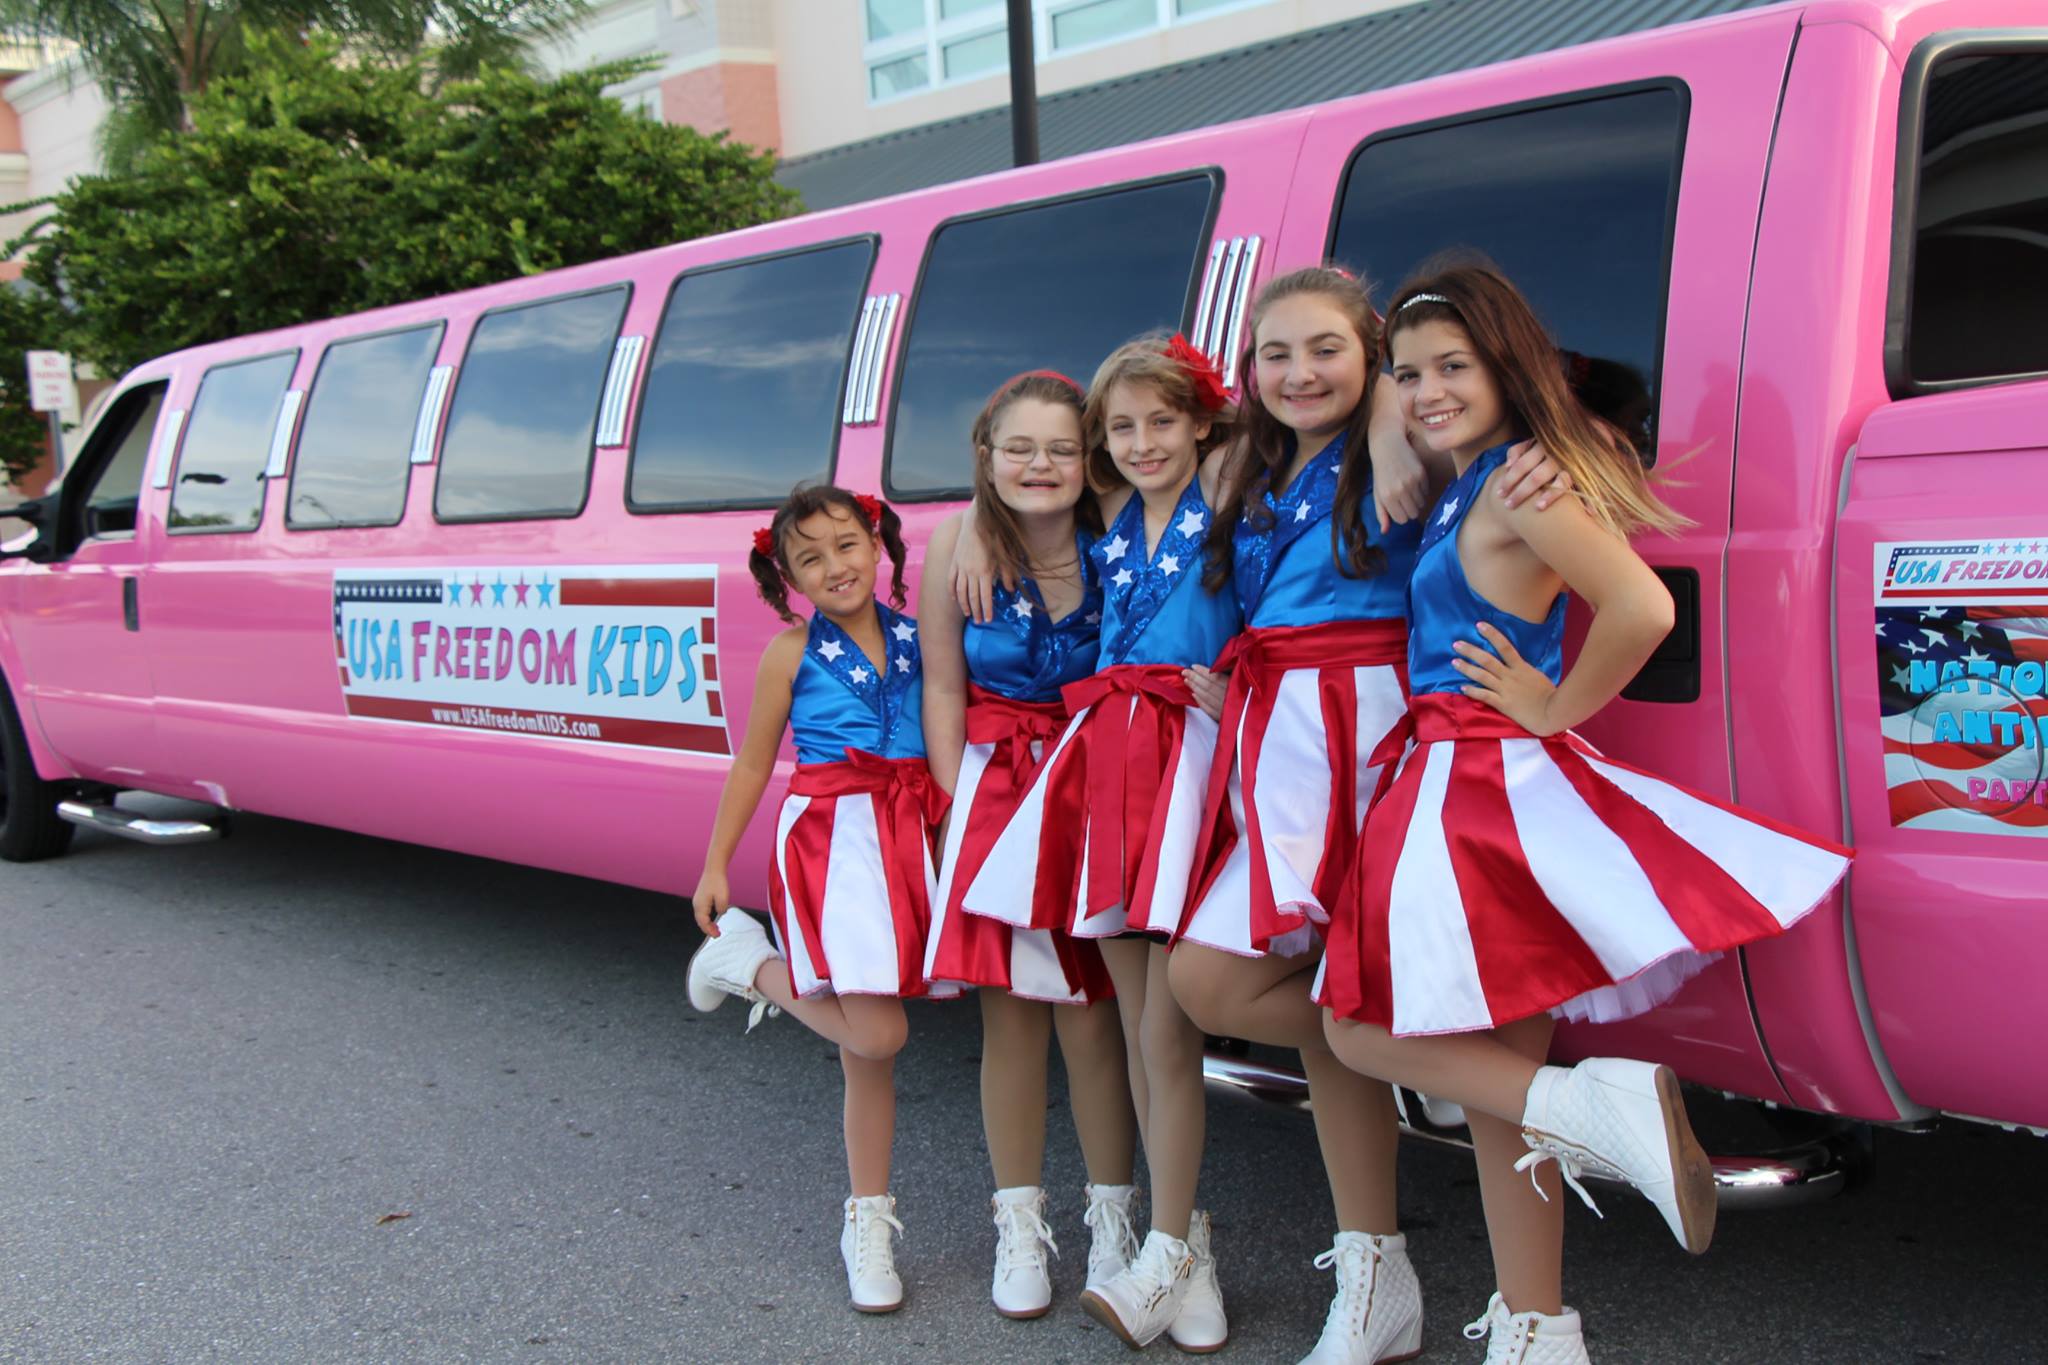 The "USA Freedom Kids" is a girl group based in Florida. They performed for Donald Trump at the Republican presidential frontrunner's rally on Jan. 13.